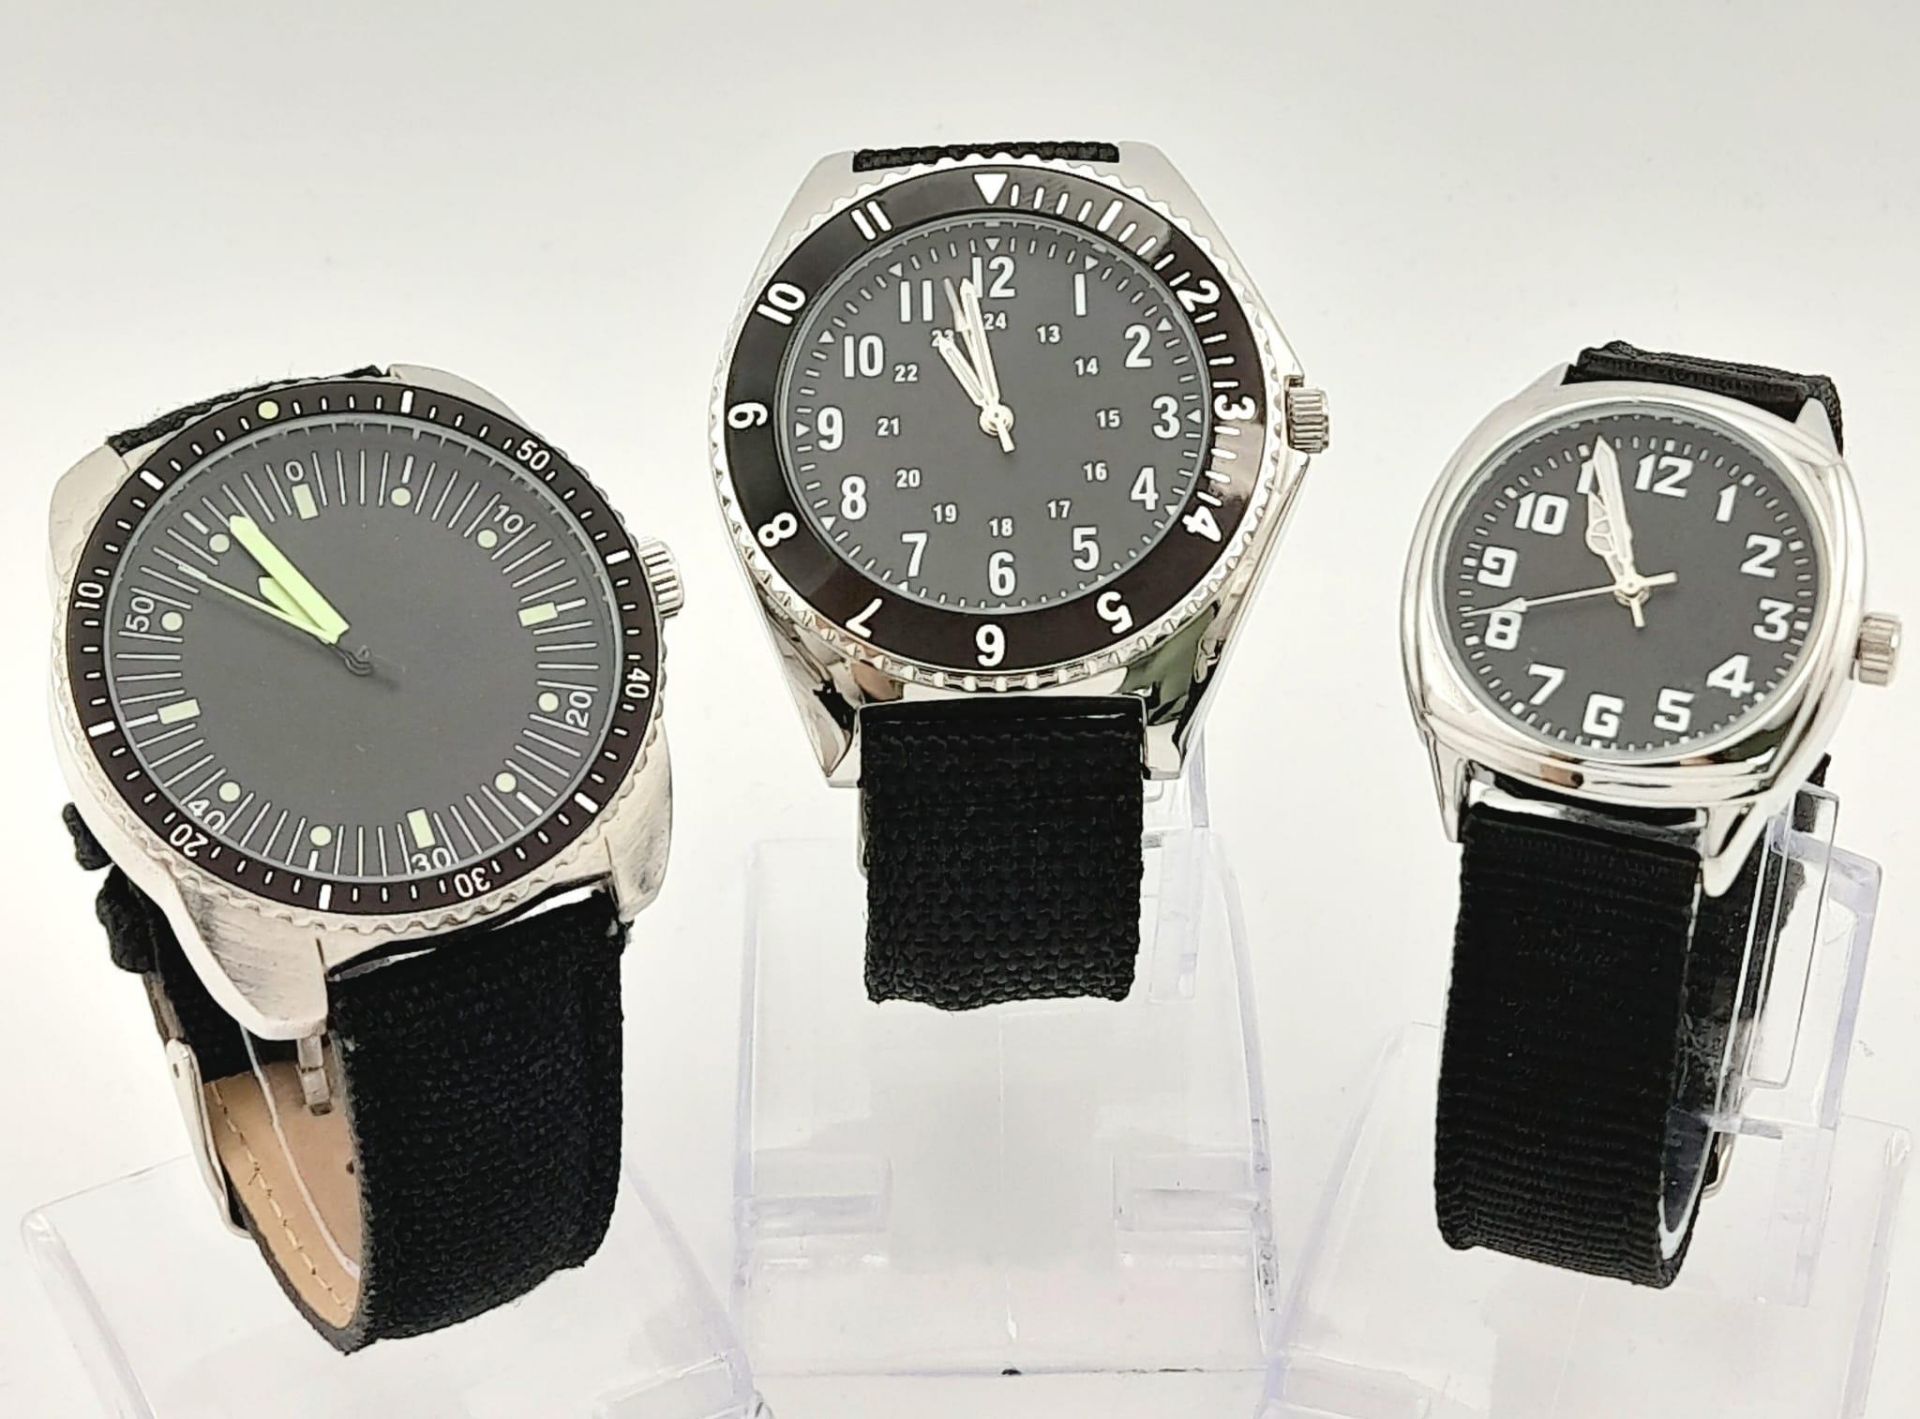 Three Military design Homage Watches Comprising; 1) Canadian Airforce Navigator Watch (45mm Case),